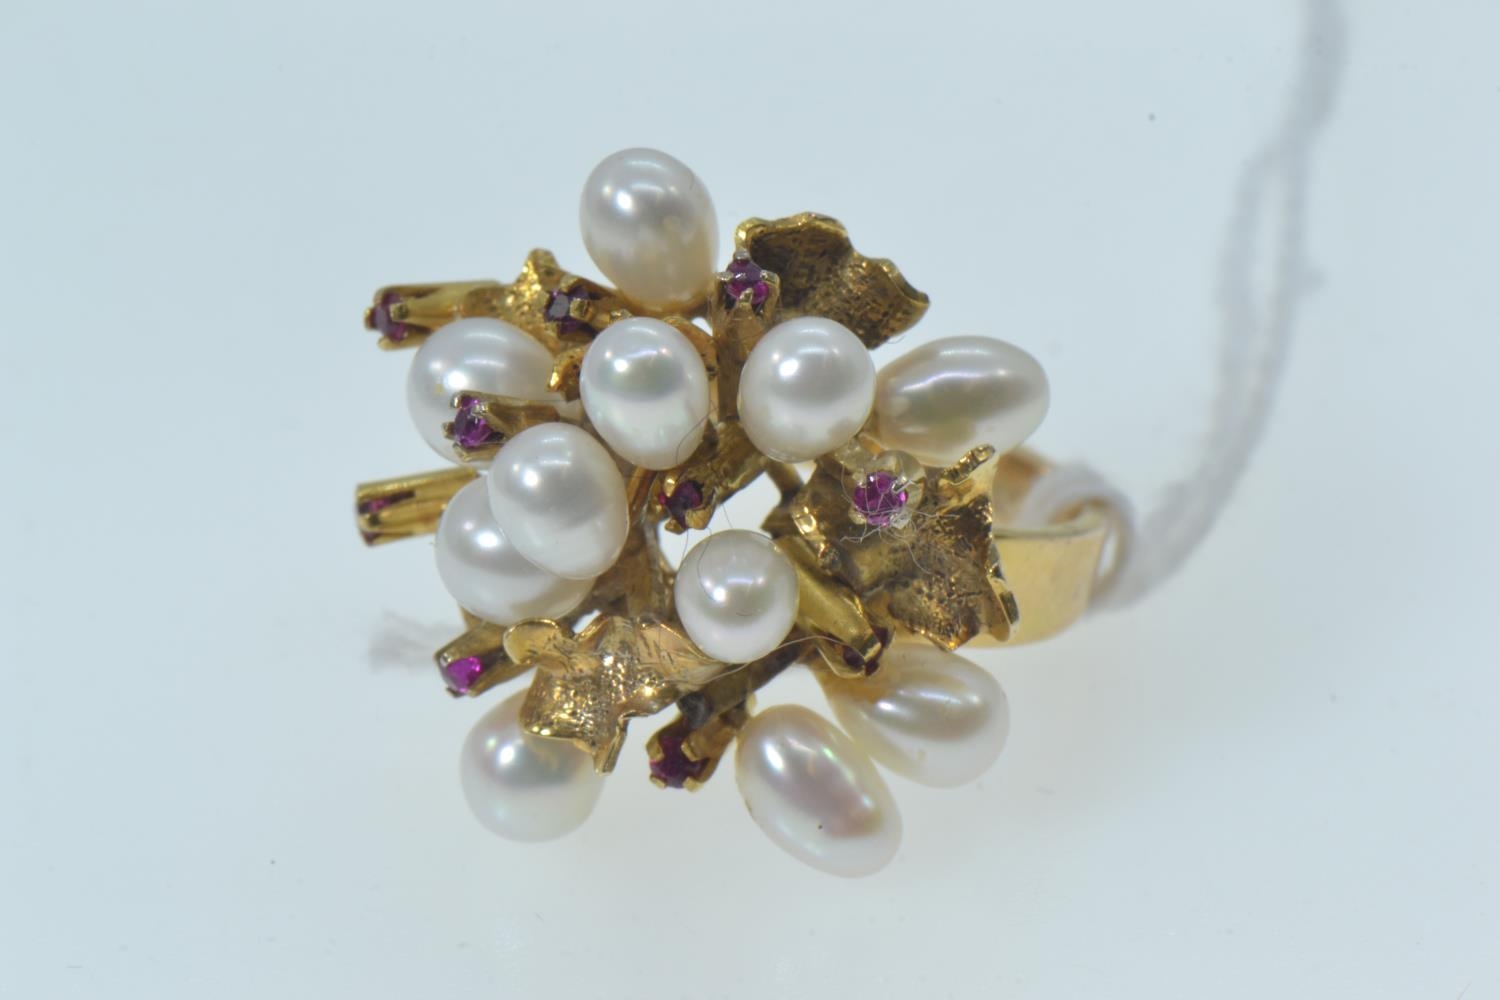 14ct gold cluster ring set with eleven pearls and ten rubies, marked 14K, size L, gross weight 7 gra - Image 4 of 5